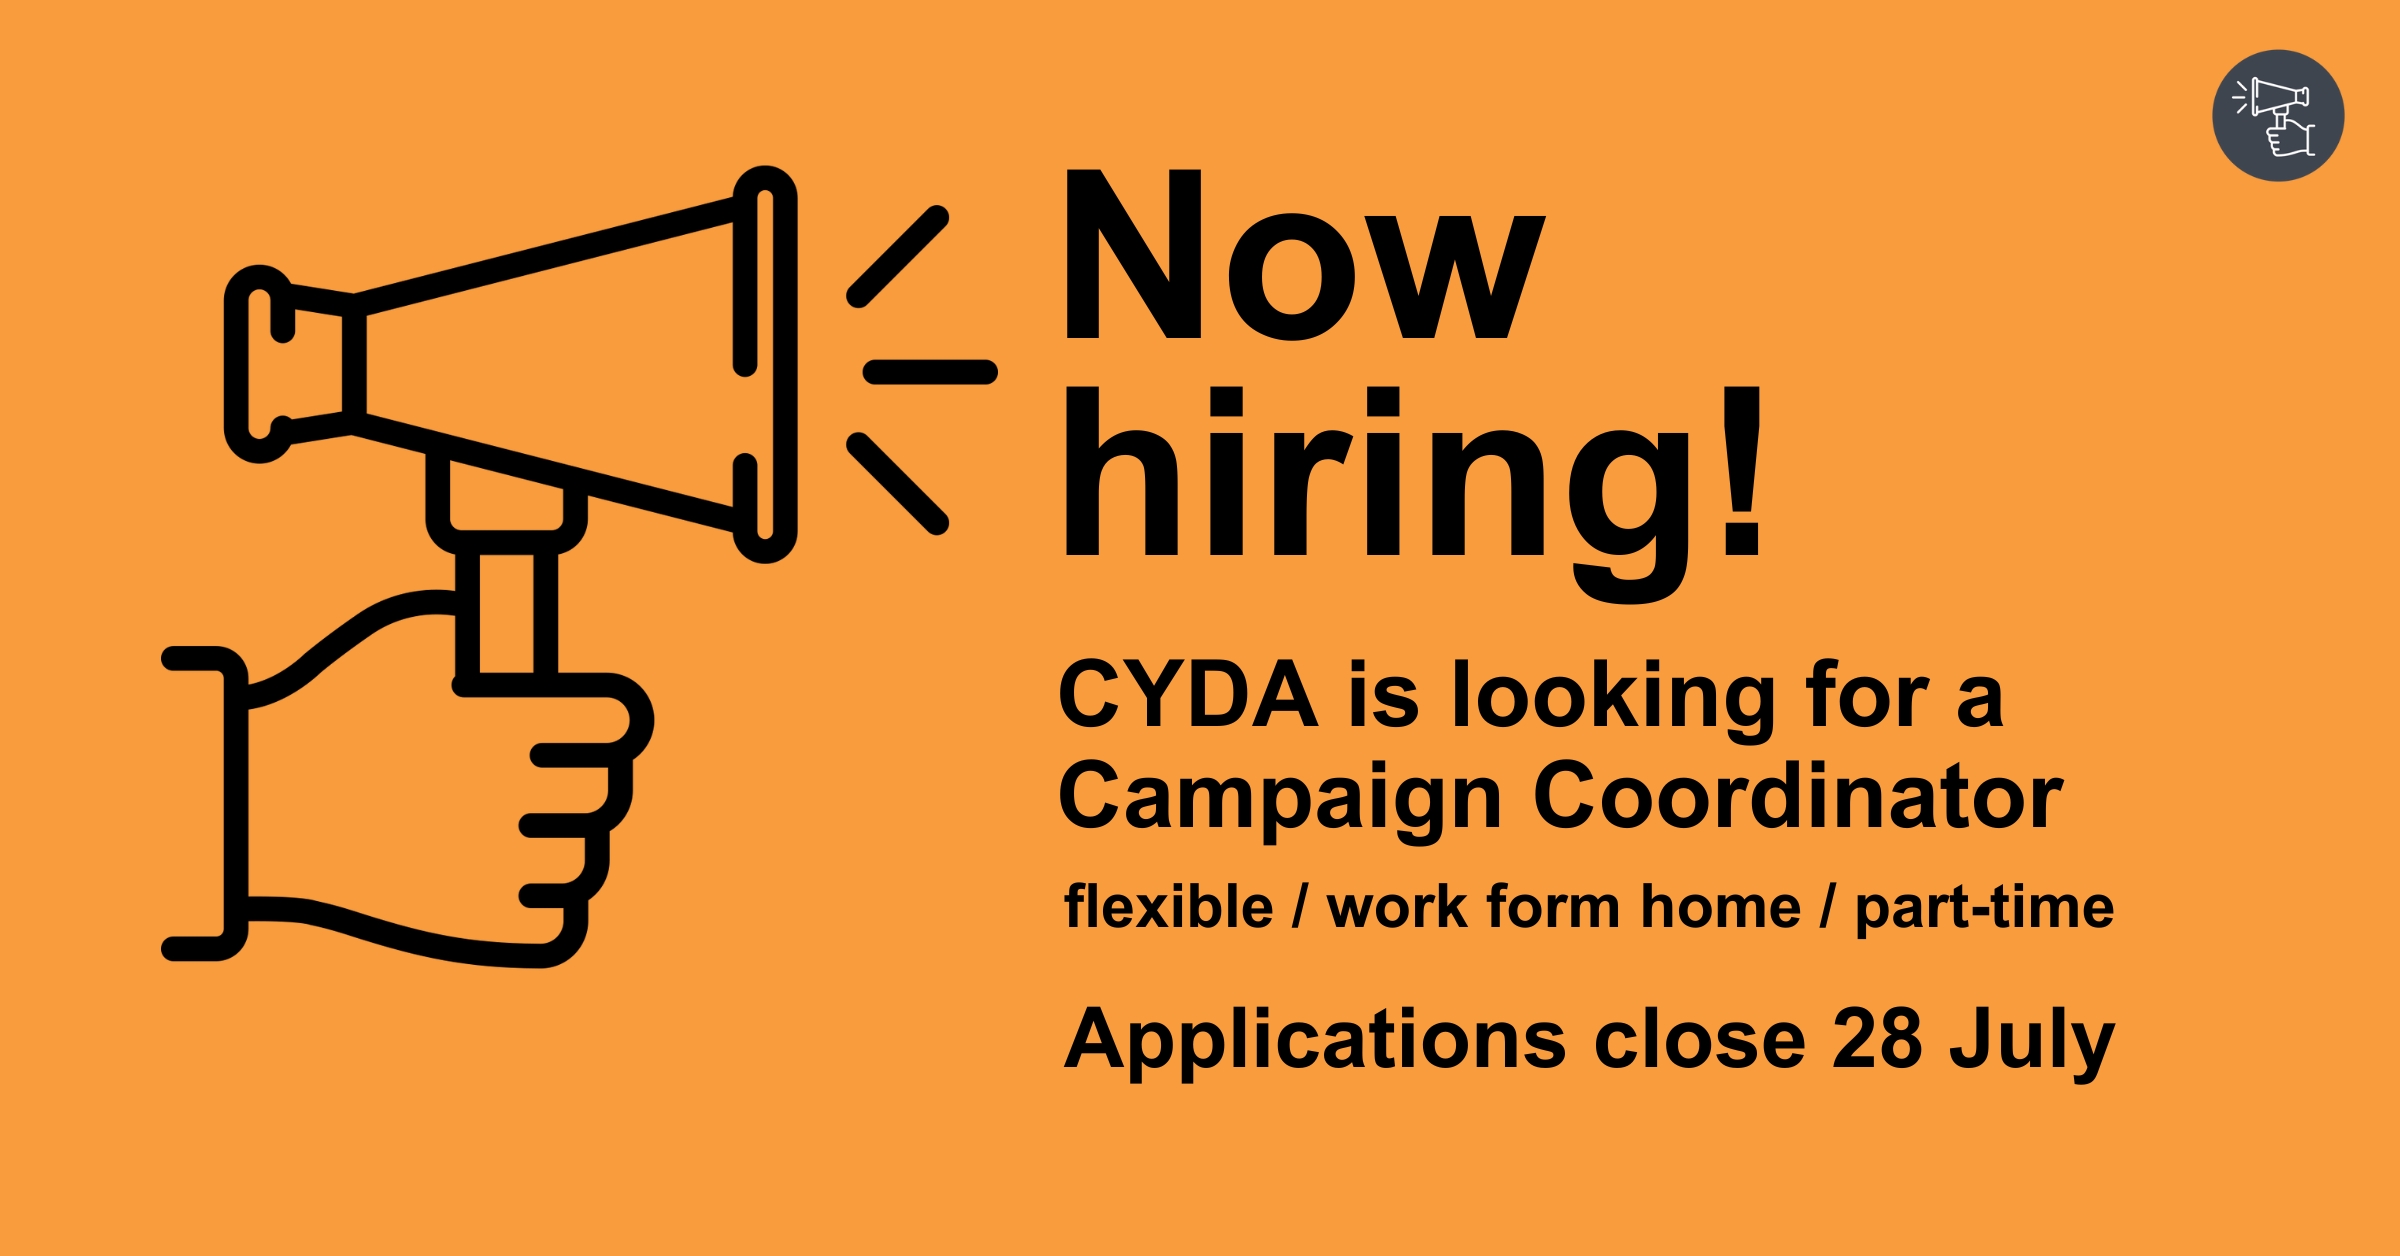 A megaphone on an orange background with text reading "Now hiring! CYDA is looking for a Campaign Coordinator. flexible/work from home/part-time. Applications close 28 July".